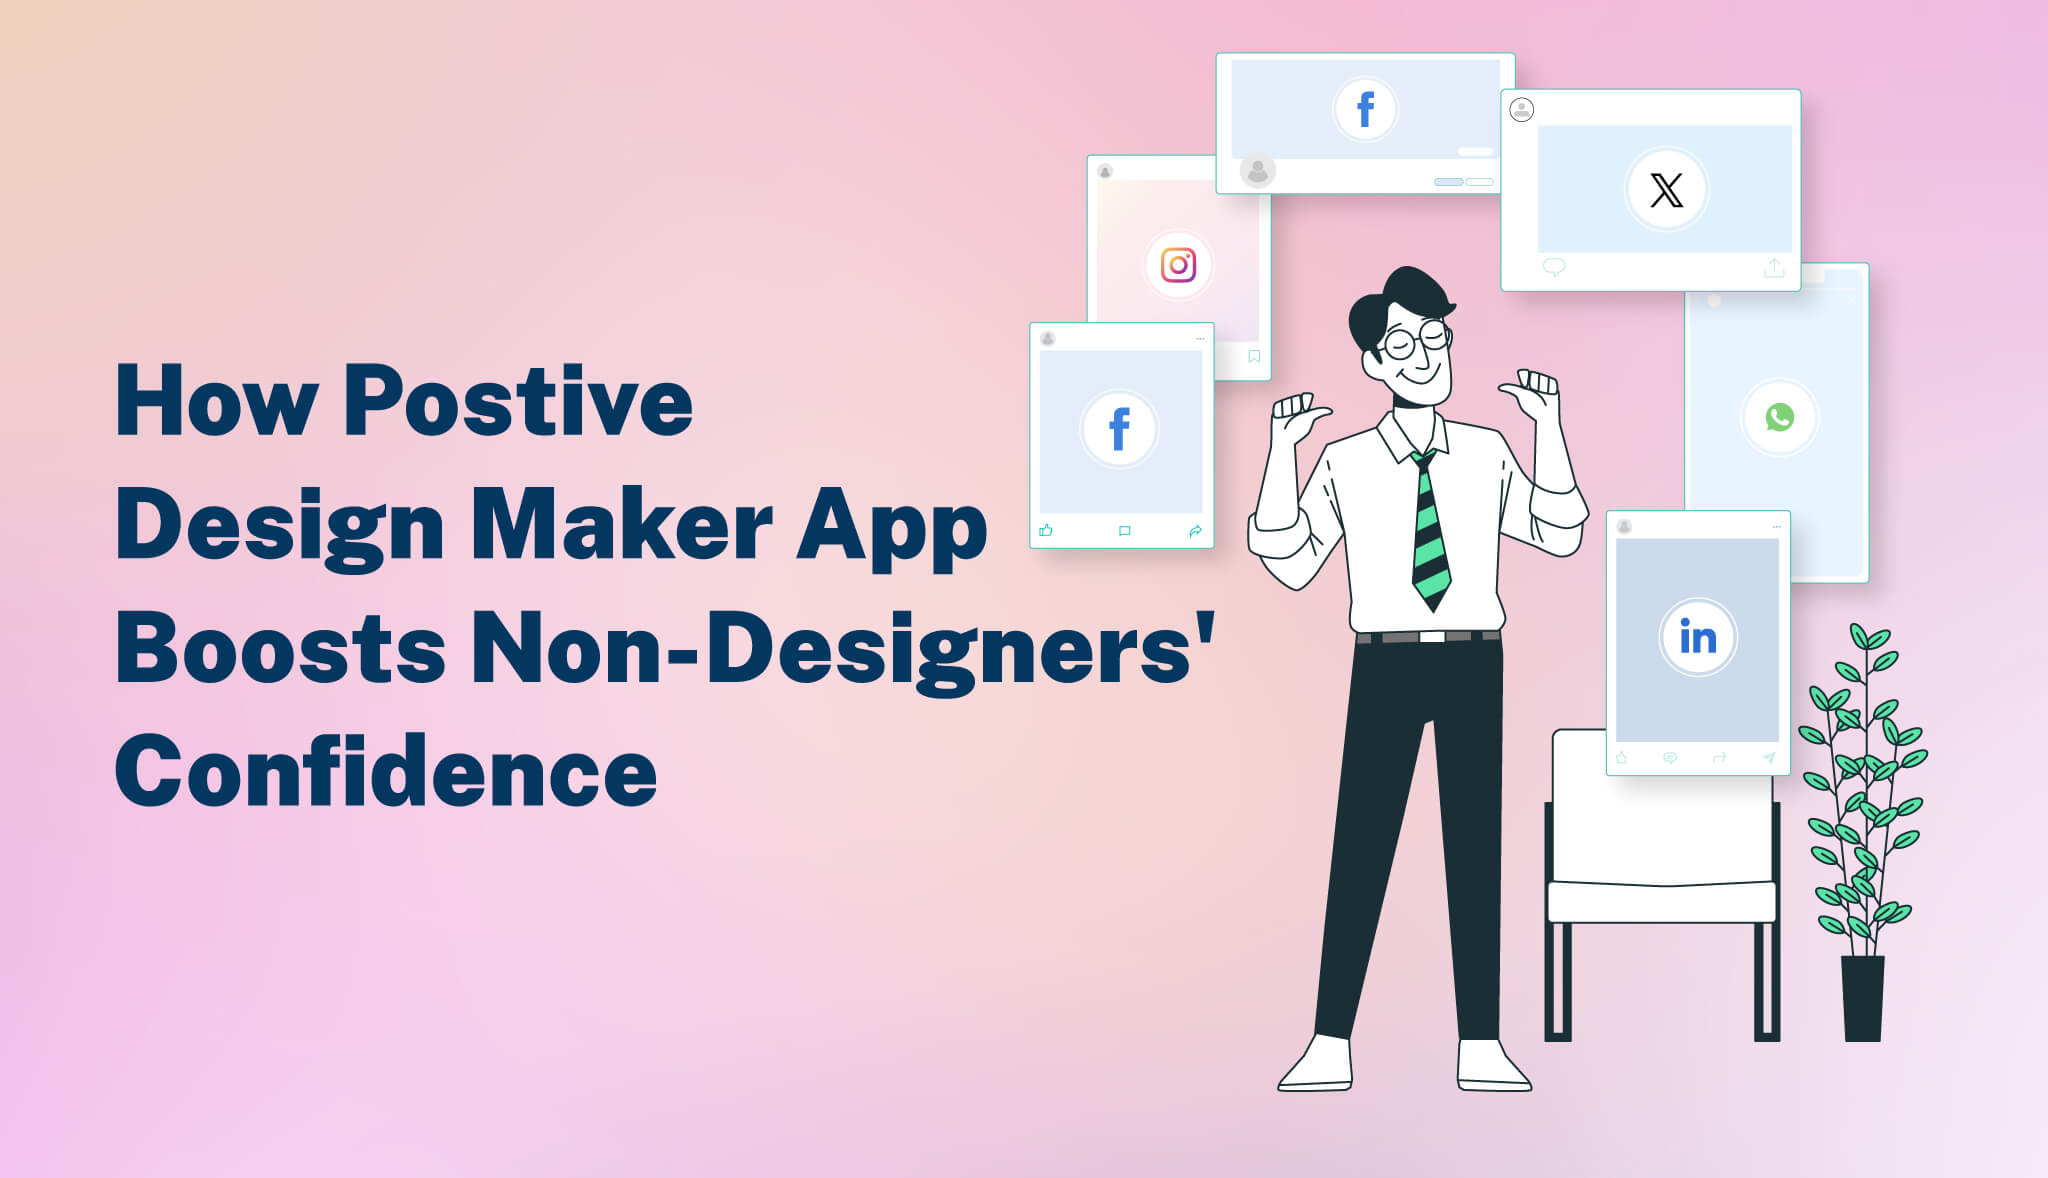 Boost Confidence with Easy Design: Postive for Non-Designers - Postive